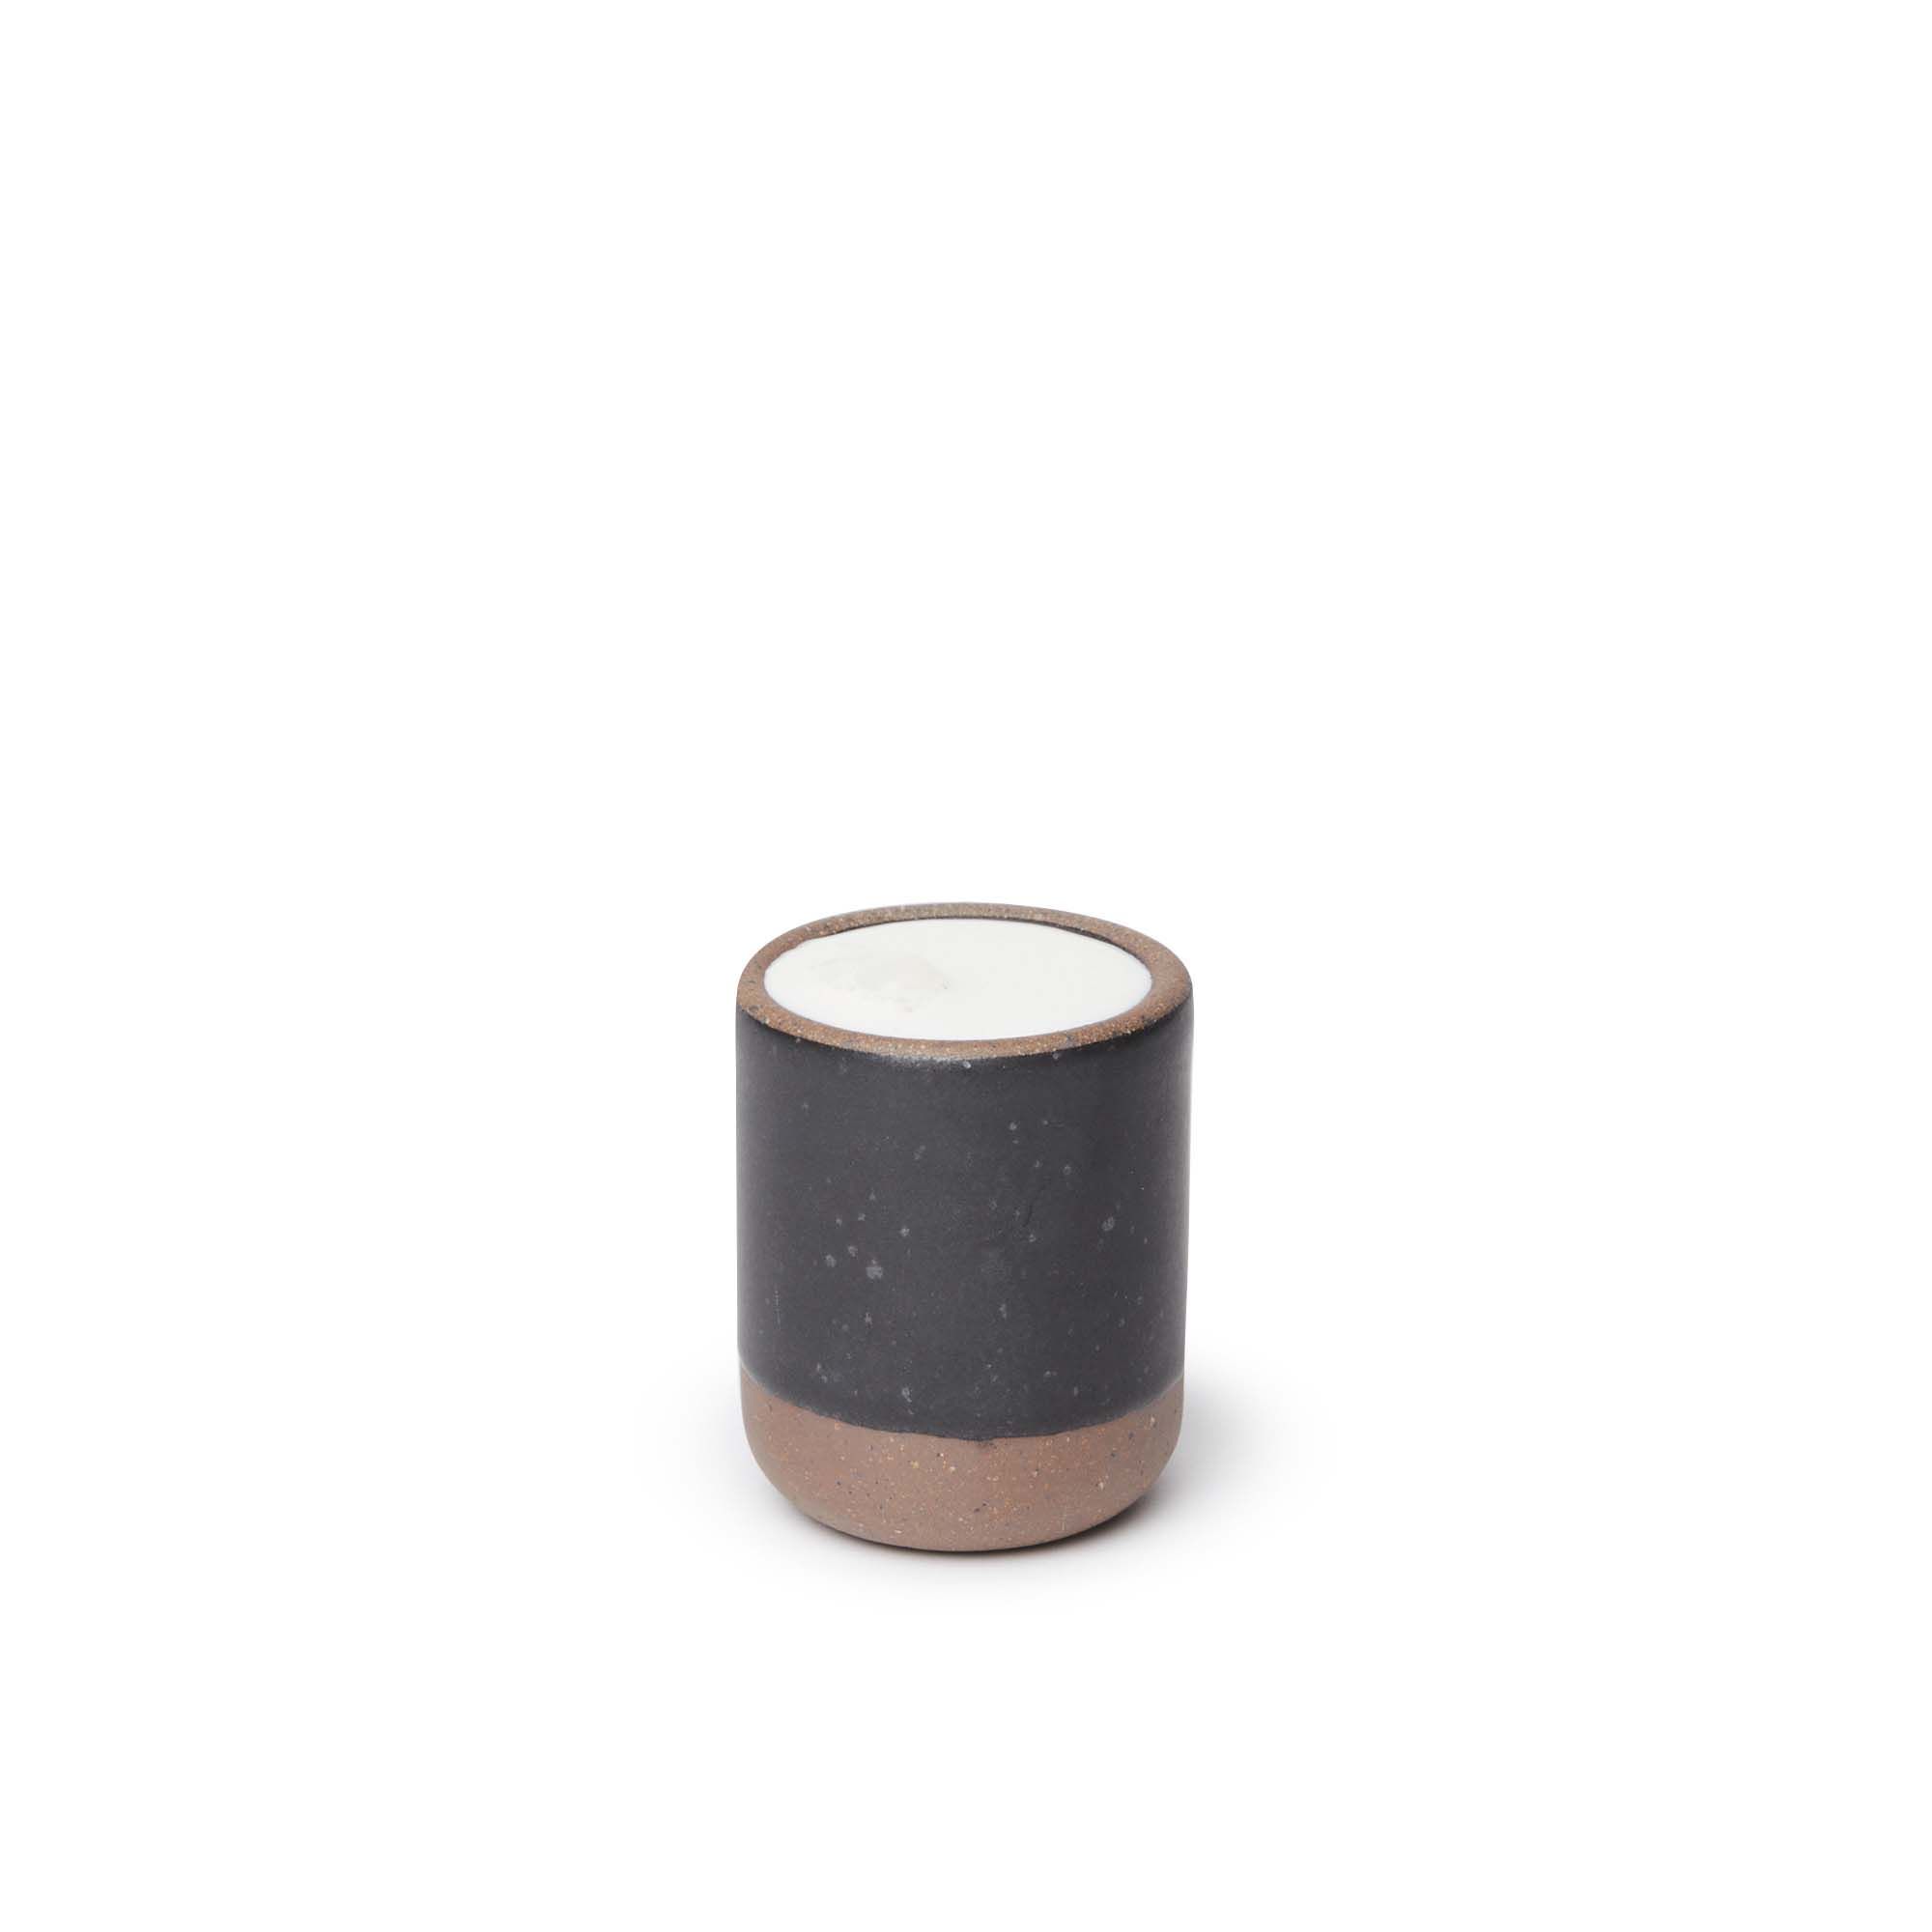 A small, short ceramic mug cup in a graphite black color featuring iron speckles and unglazed rim and bottom base, filled with milk.